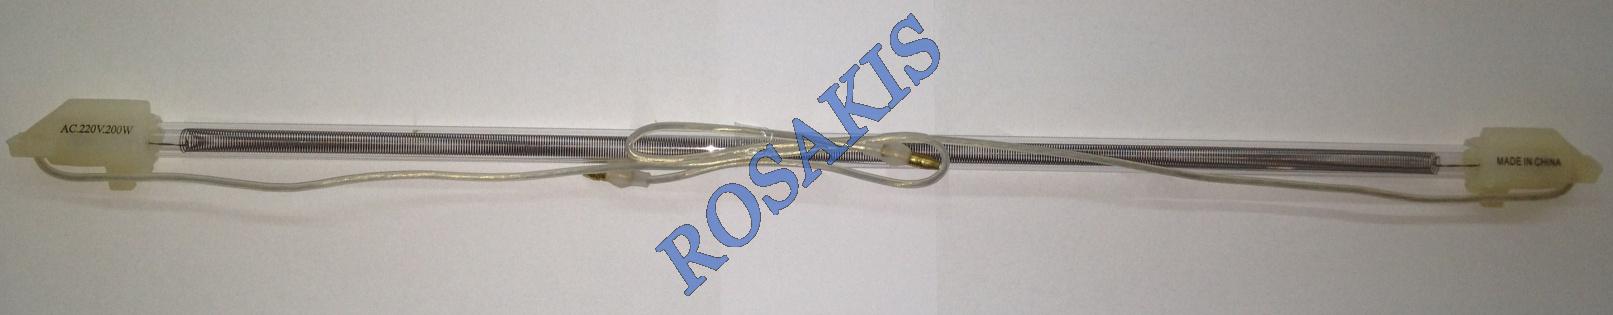 DEFROS.RESIST.GLASS TUBE SAMSUNG-GENERAL ELECTRIC 45,72c 18IN